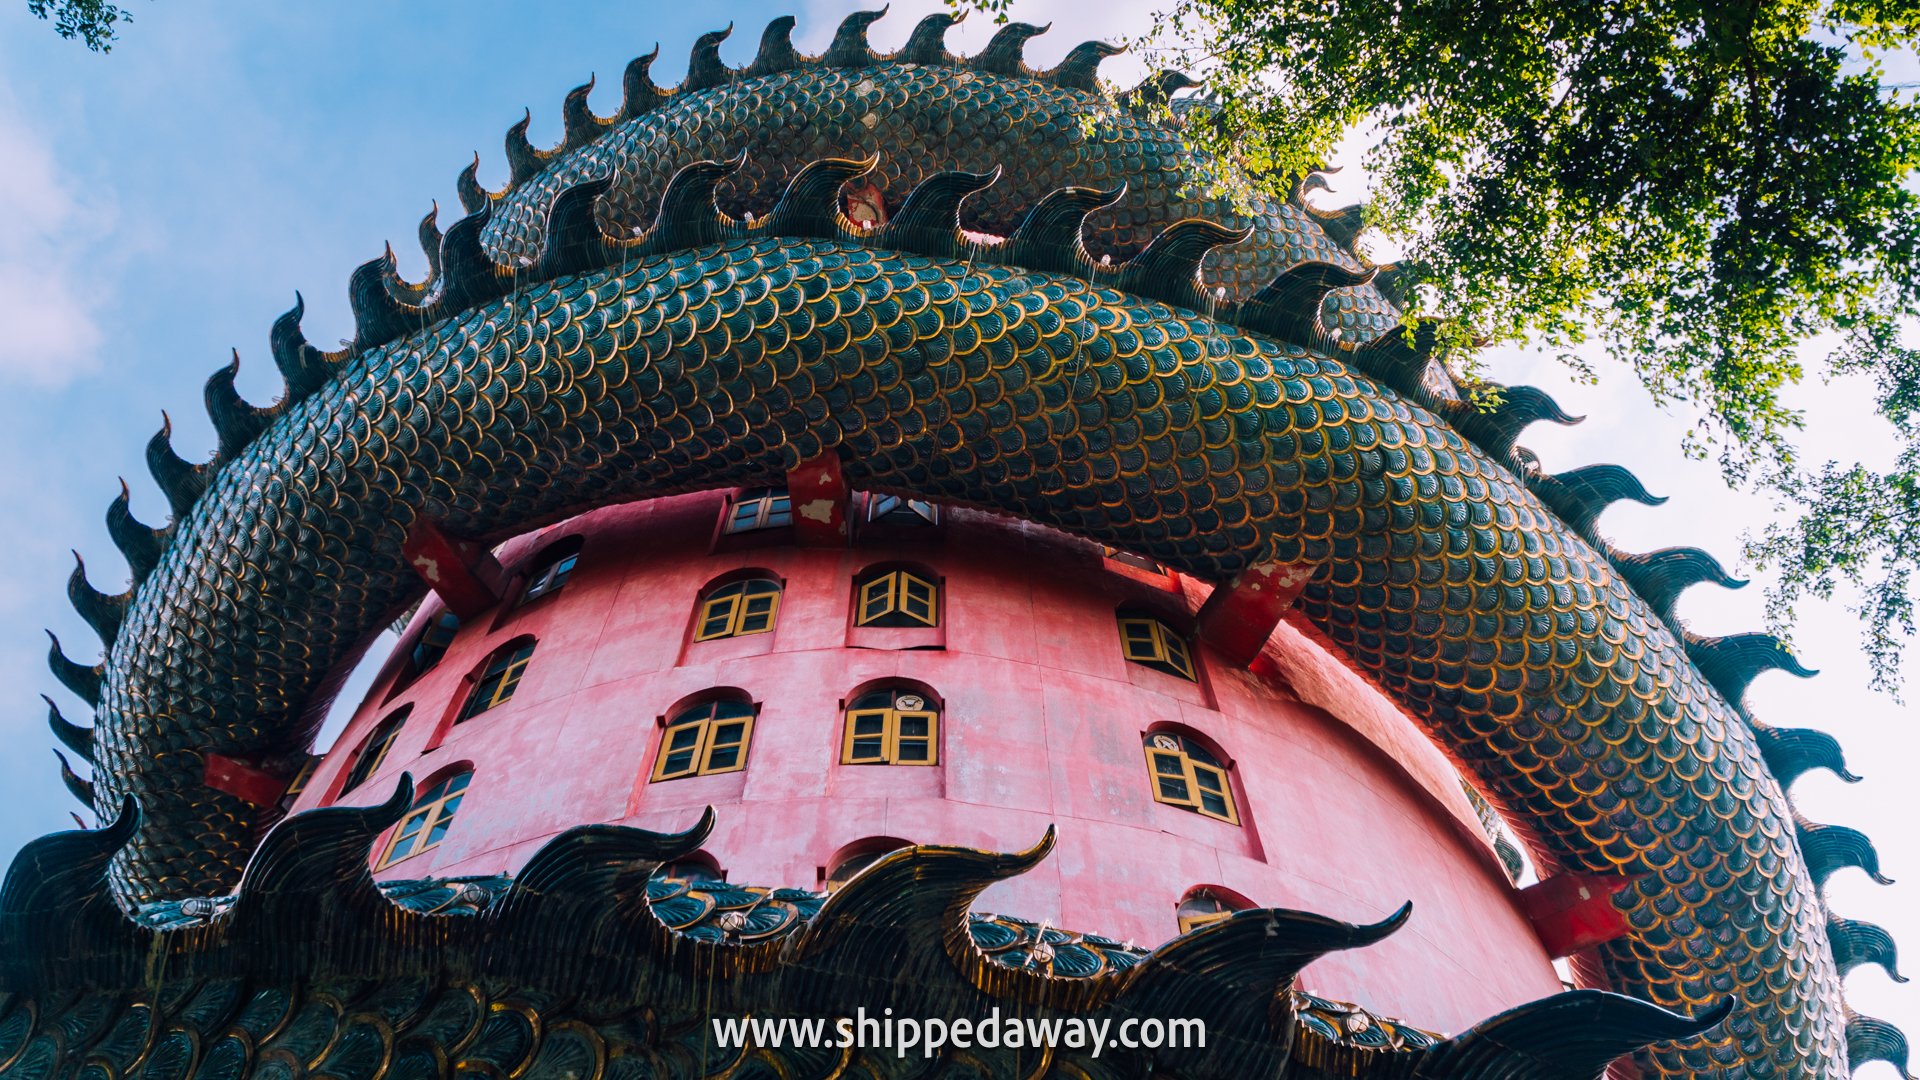 Architecture of Dragon Temple Bangkok, Thailand, must visit temples in bangkok, travel guide to temples in bangkok